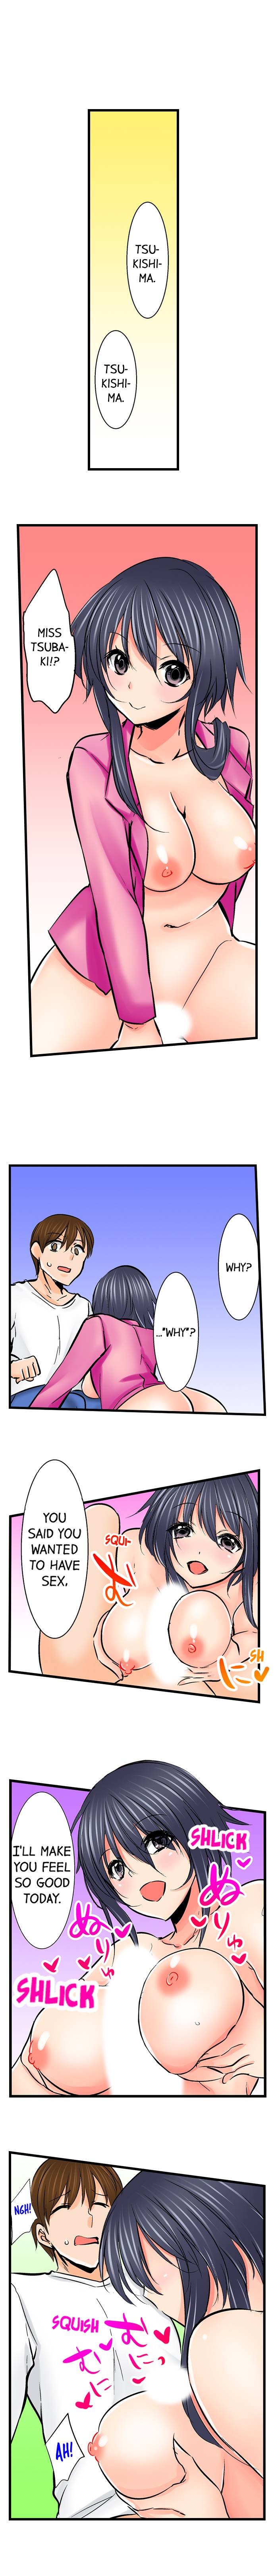 touching-my-older-sister-under-the-table-chap-45-6